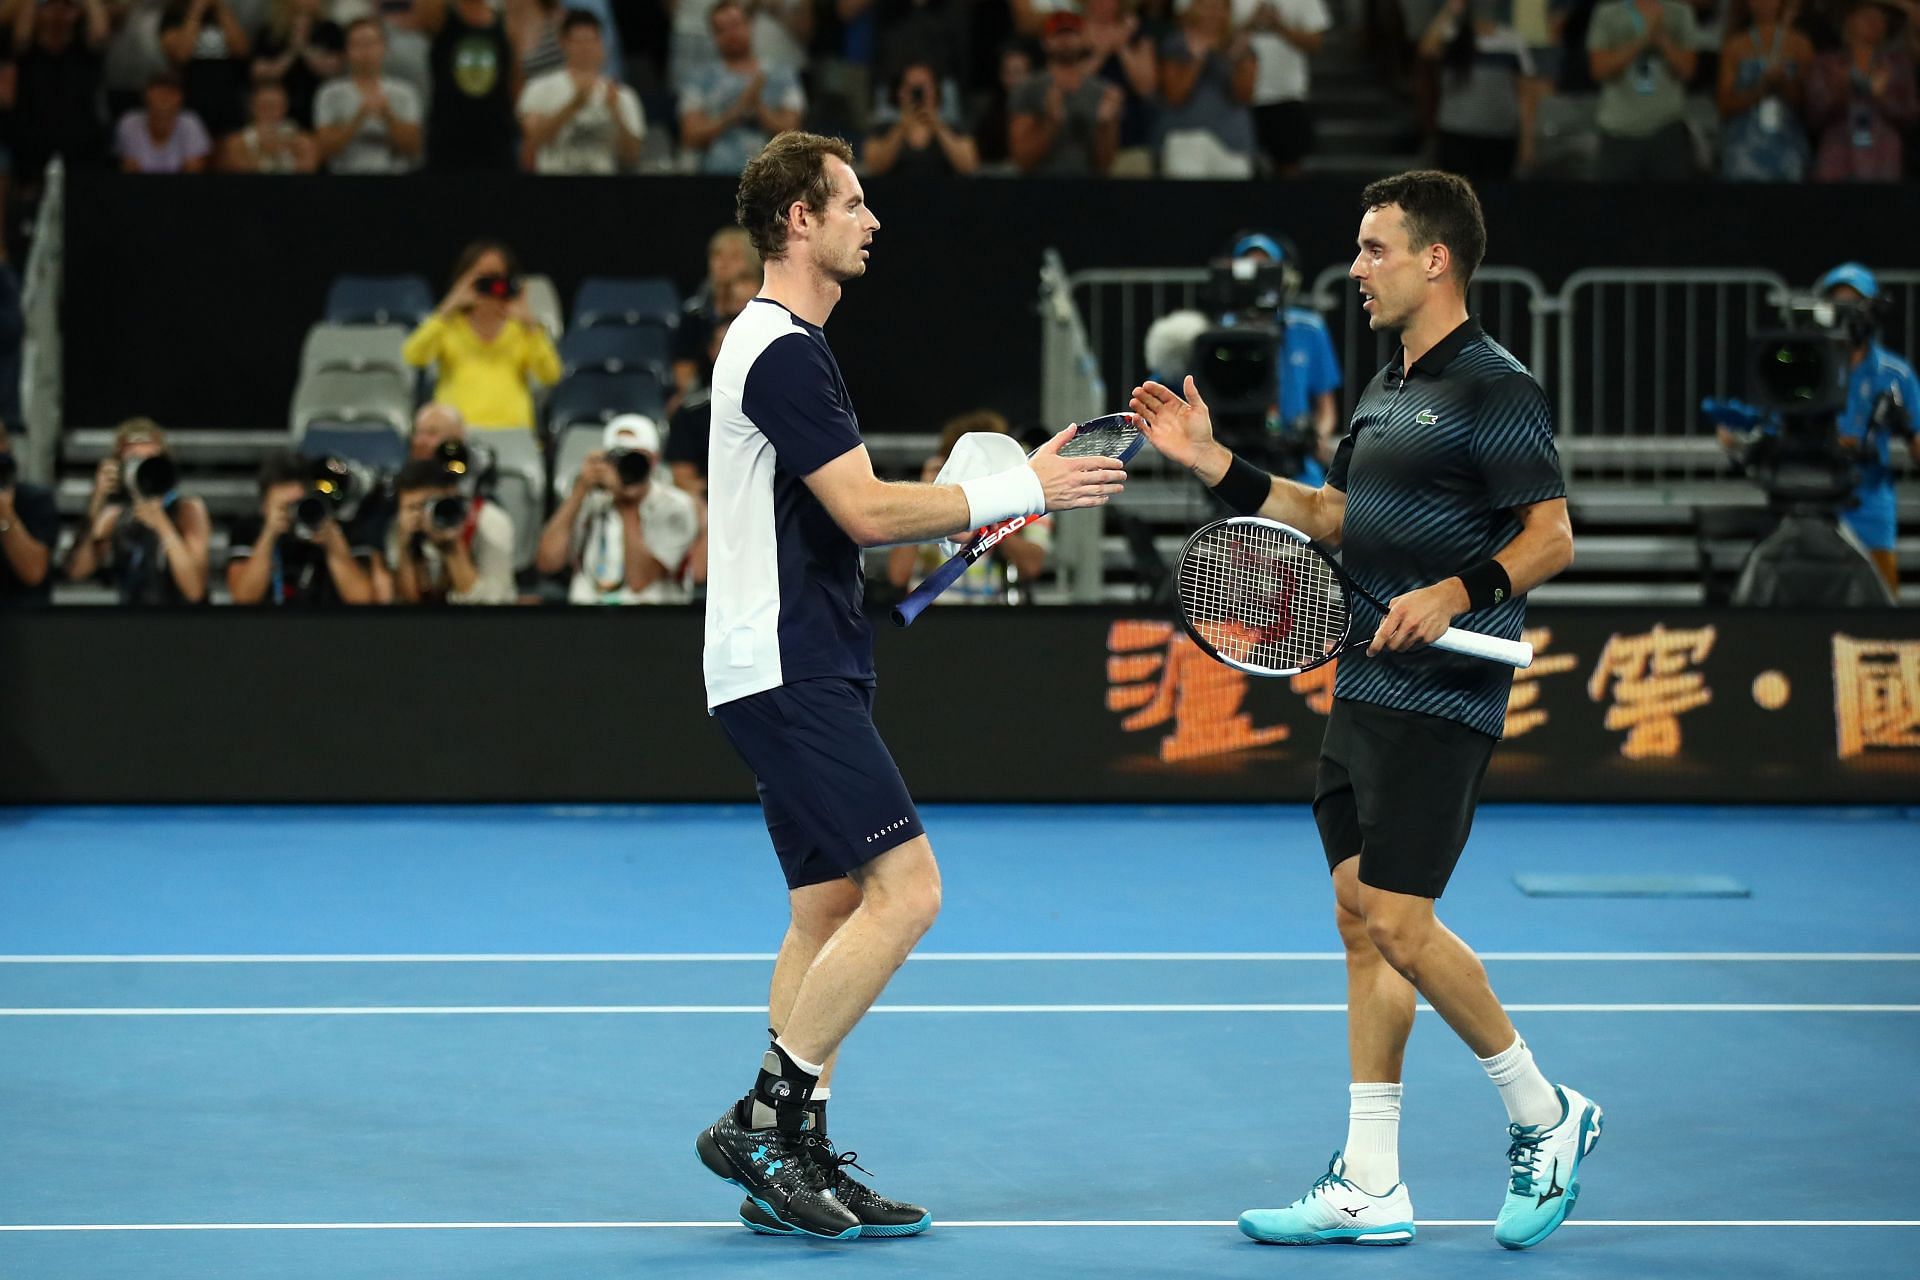 Andy Murray and Roberto Bautista Agut at the 2019 Australian Open.